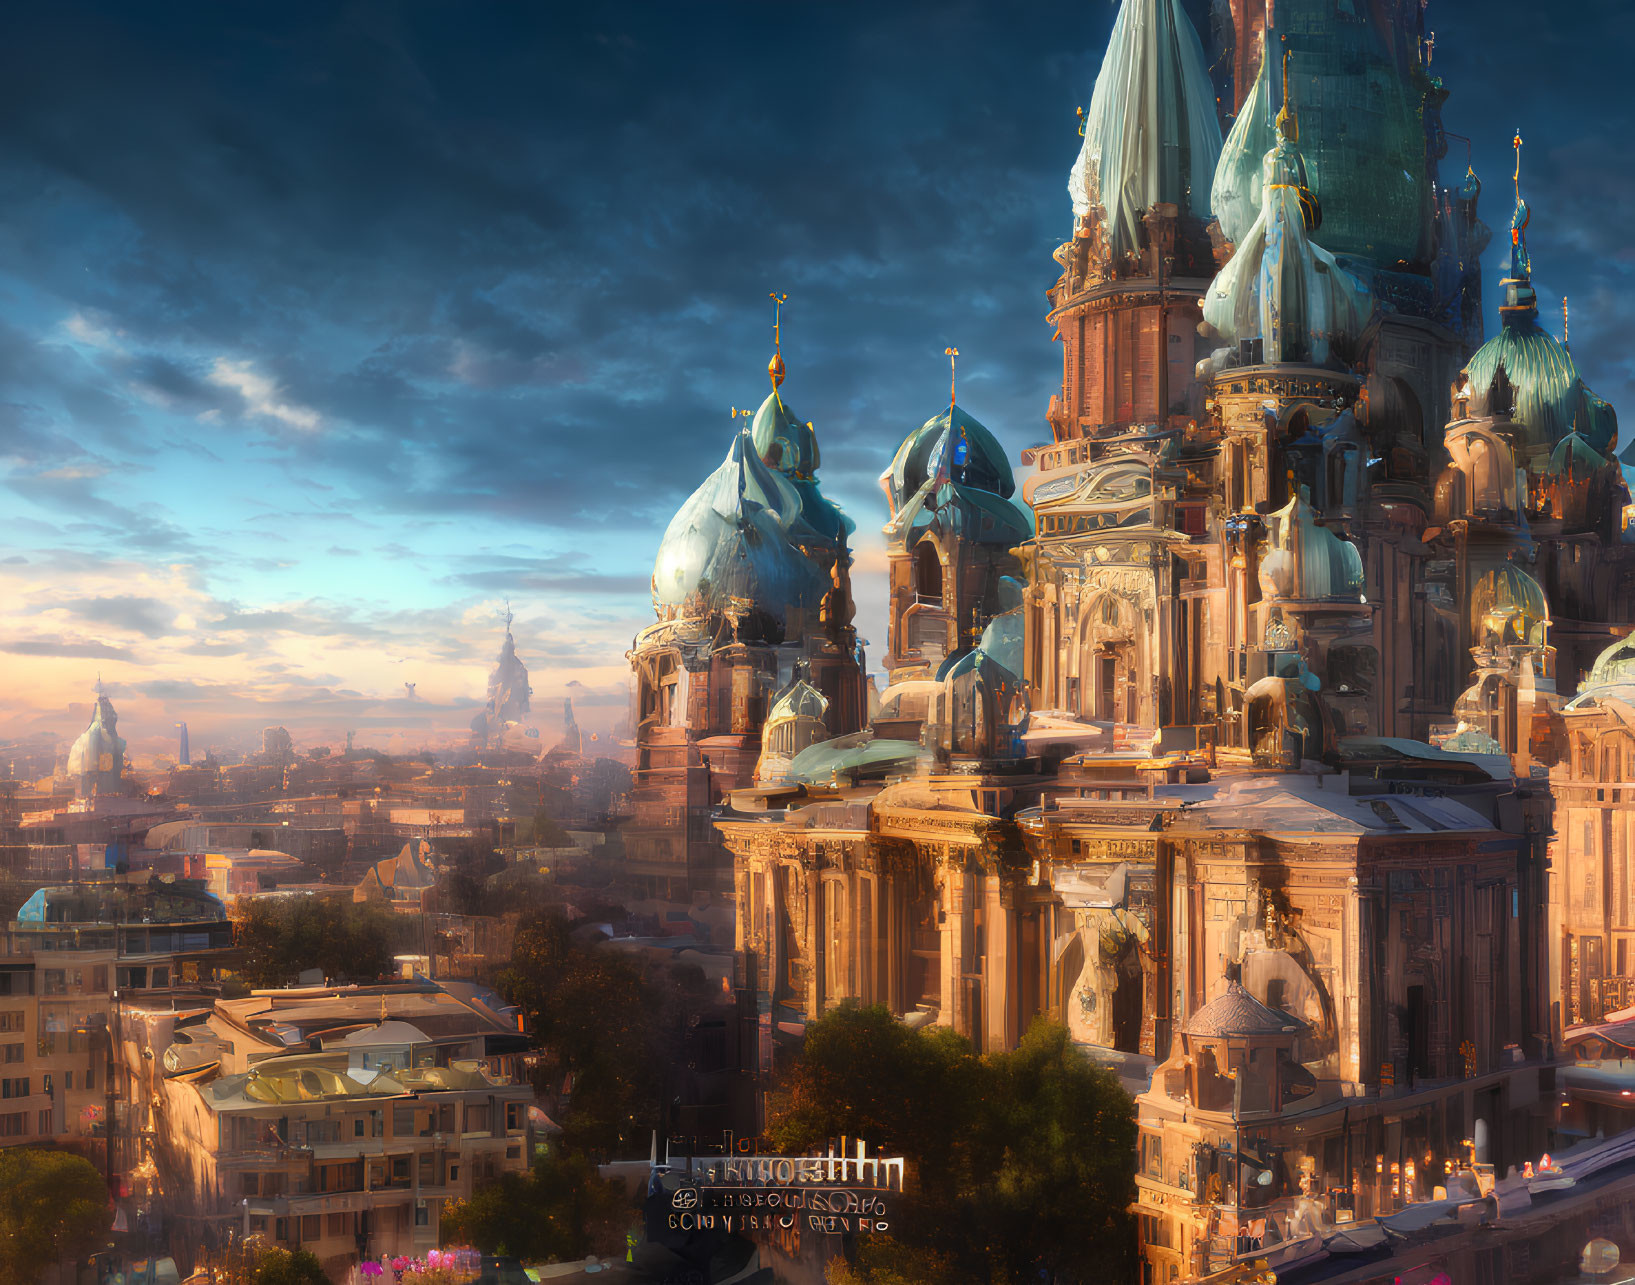 Fantastical sunset cityscape with ornate domed buildings